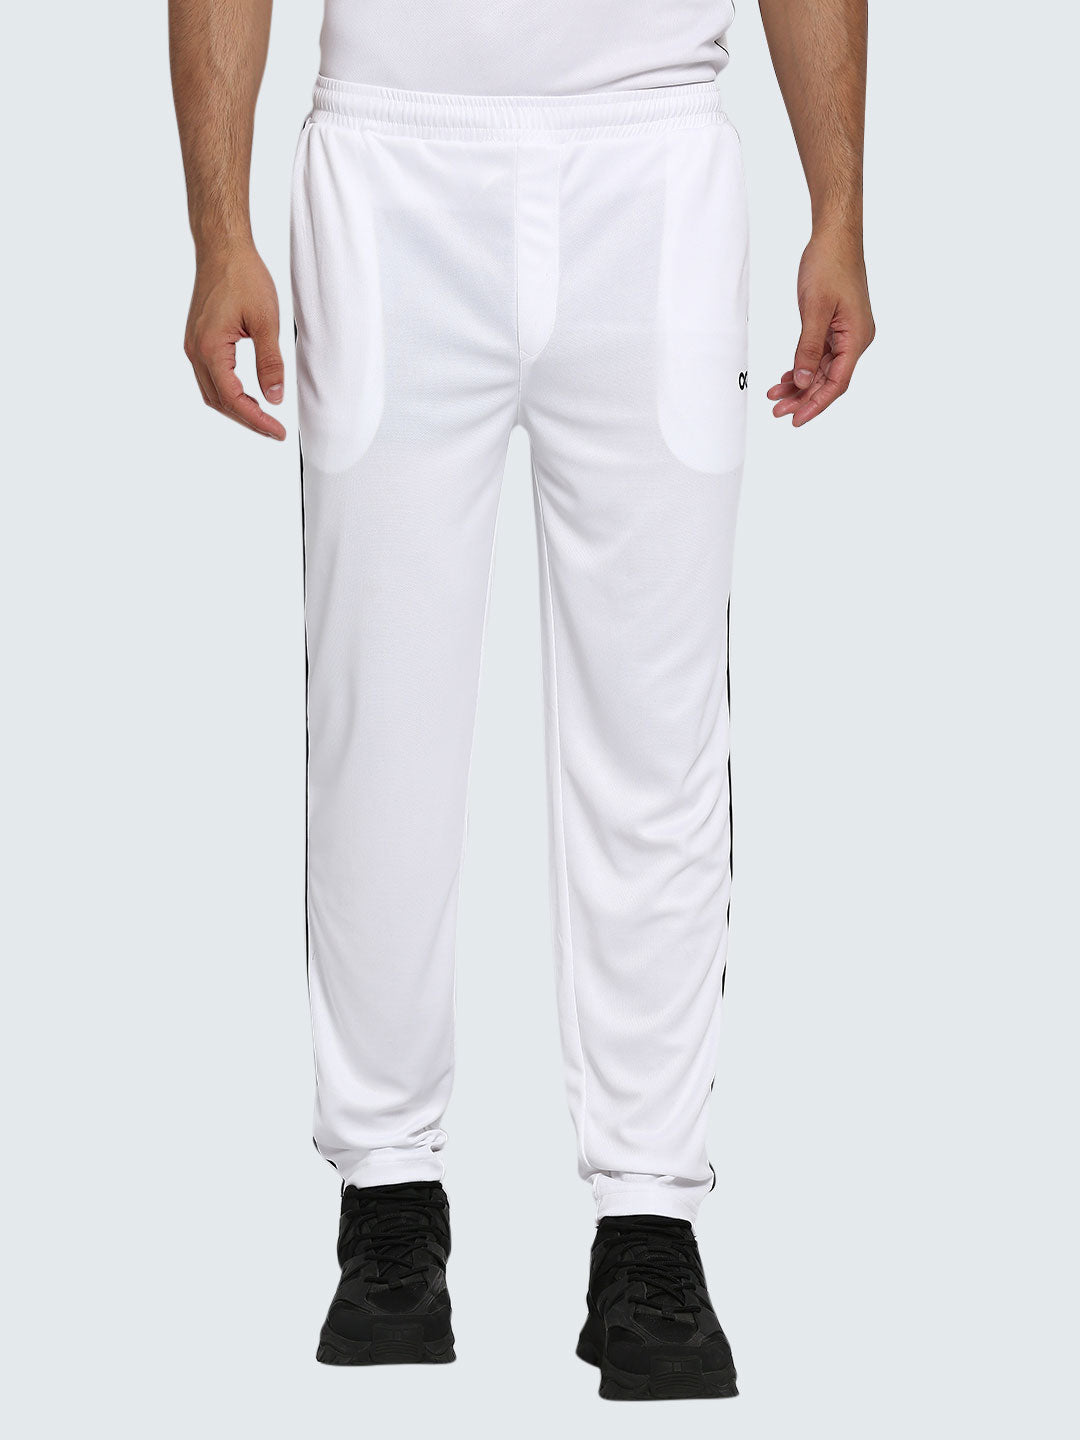 Nike Off White AS TS Dry Cricket Track Pants for men price  Best buy price  in India August 2023 detail  trends  PriceHunt